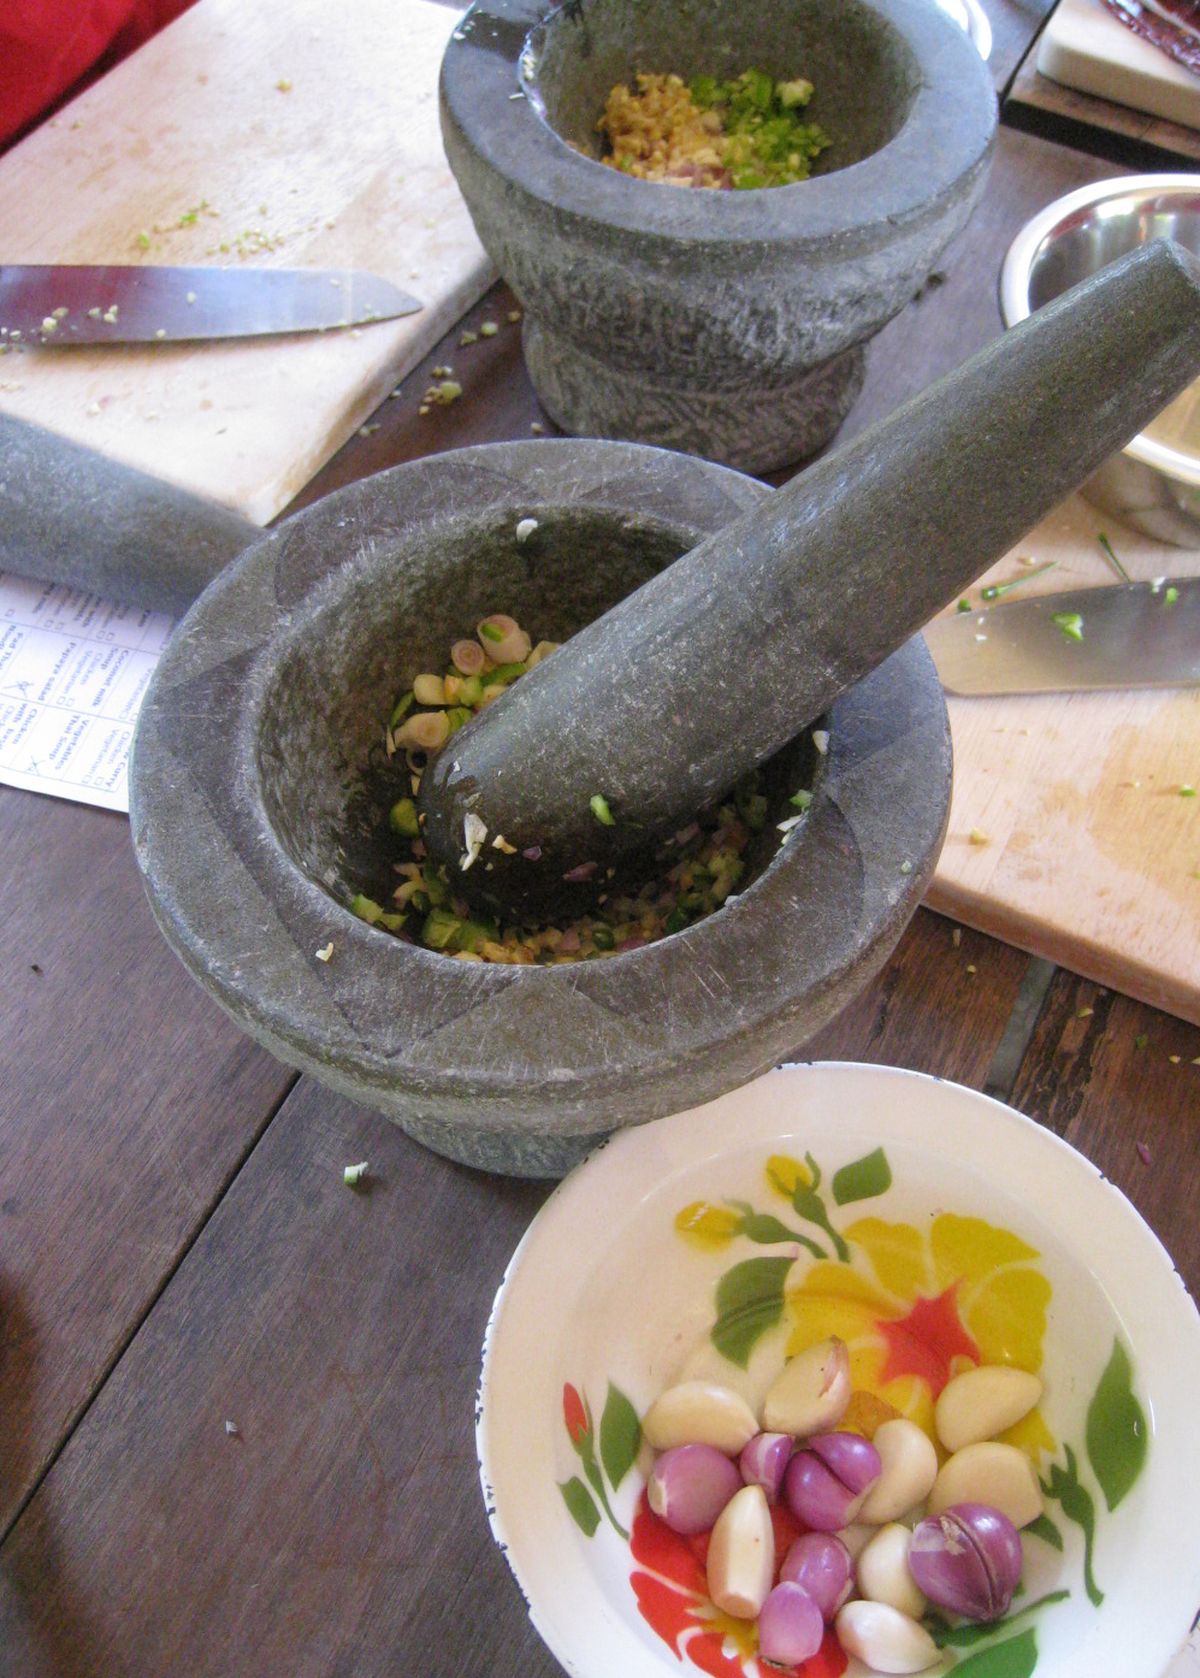 Fresh herbs and spices are ground into a smooth paste with a mortar and pestle. (Courtesy Harrington / The Spokesman-Review)